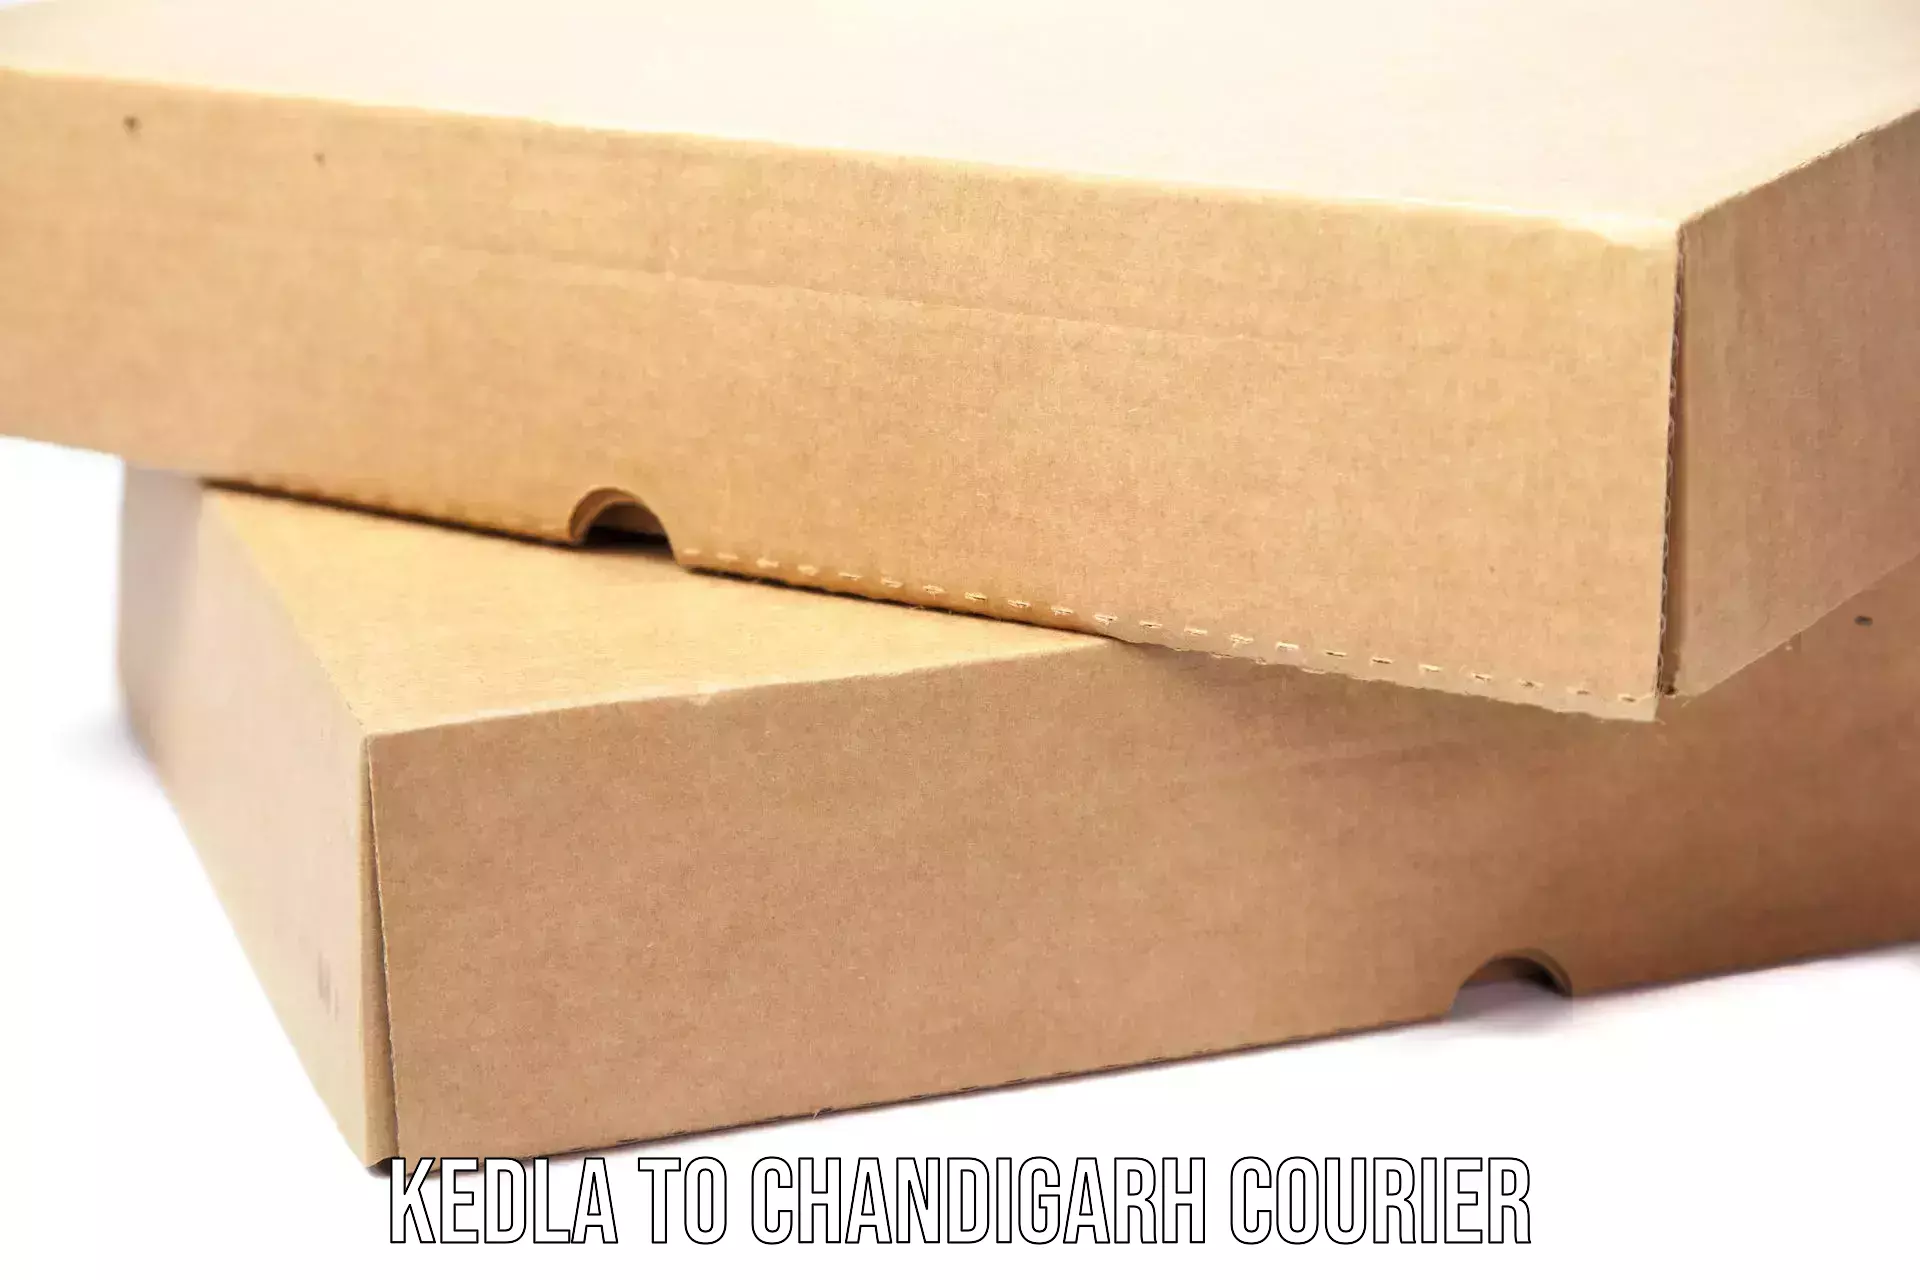 Easy access courier services Kedla to Chandigarh